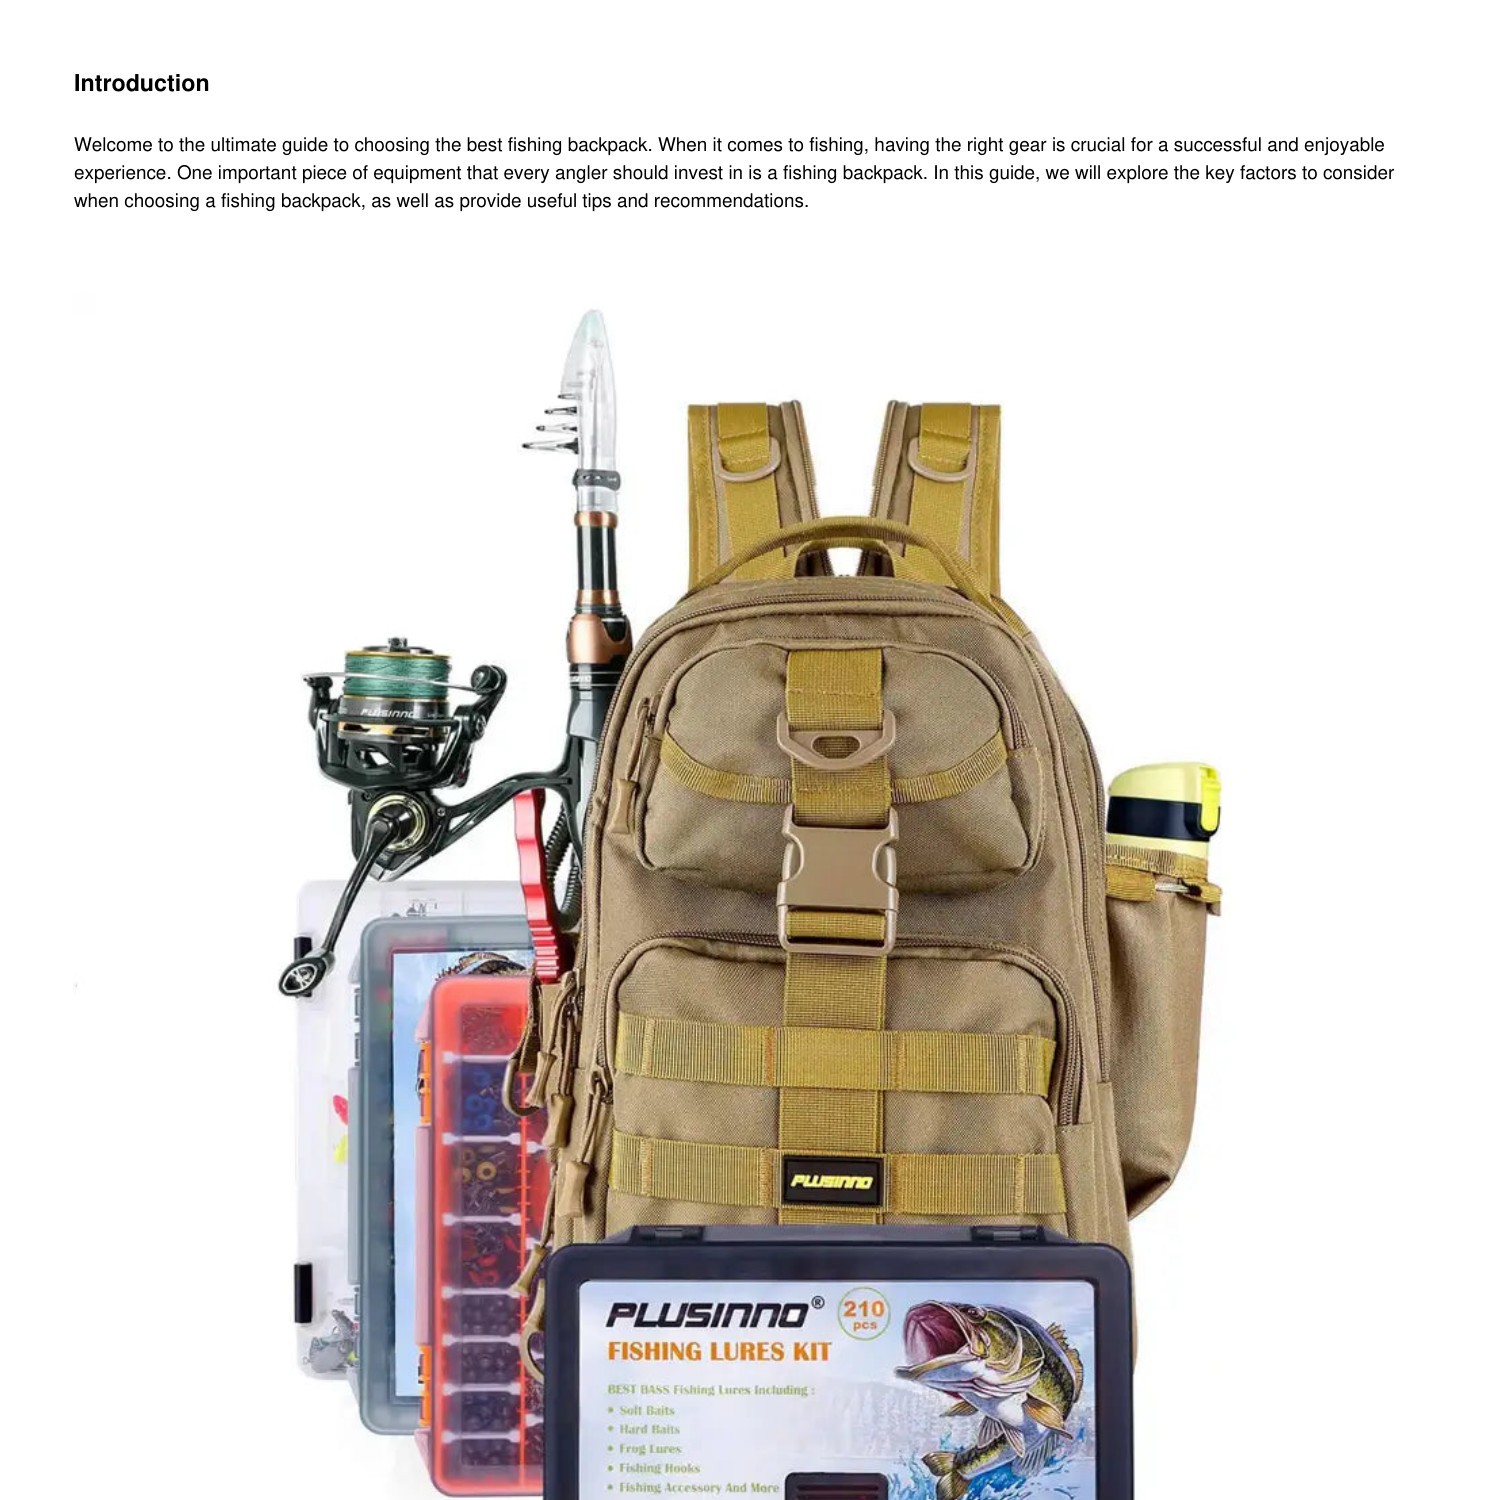 The Ultimate Guide to Choosing the Best Fishing Backpack.pdf